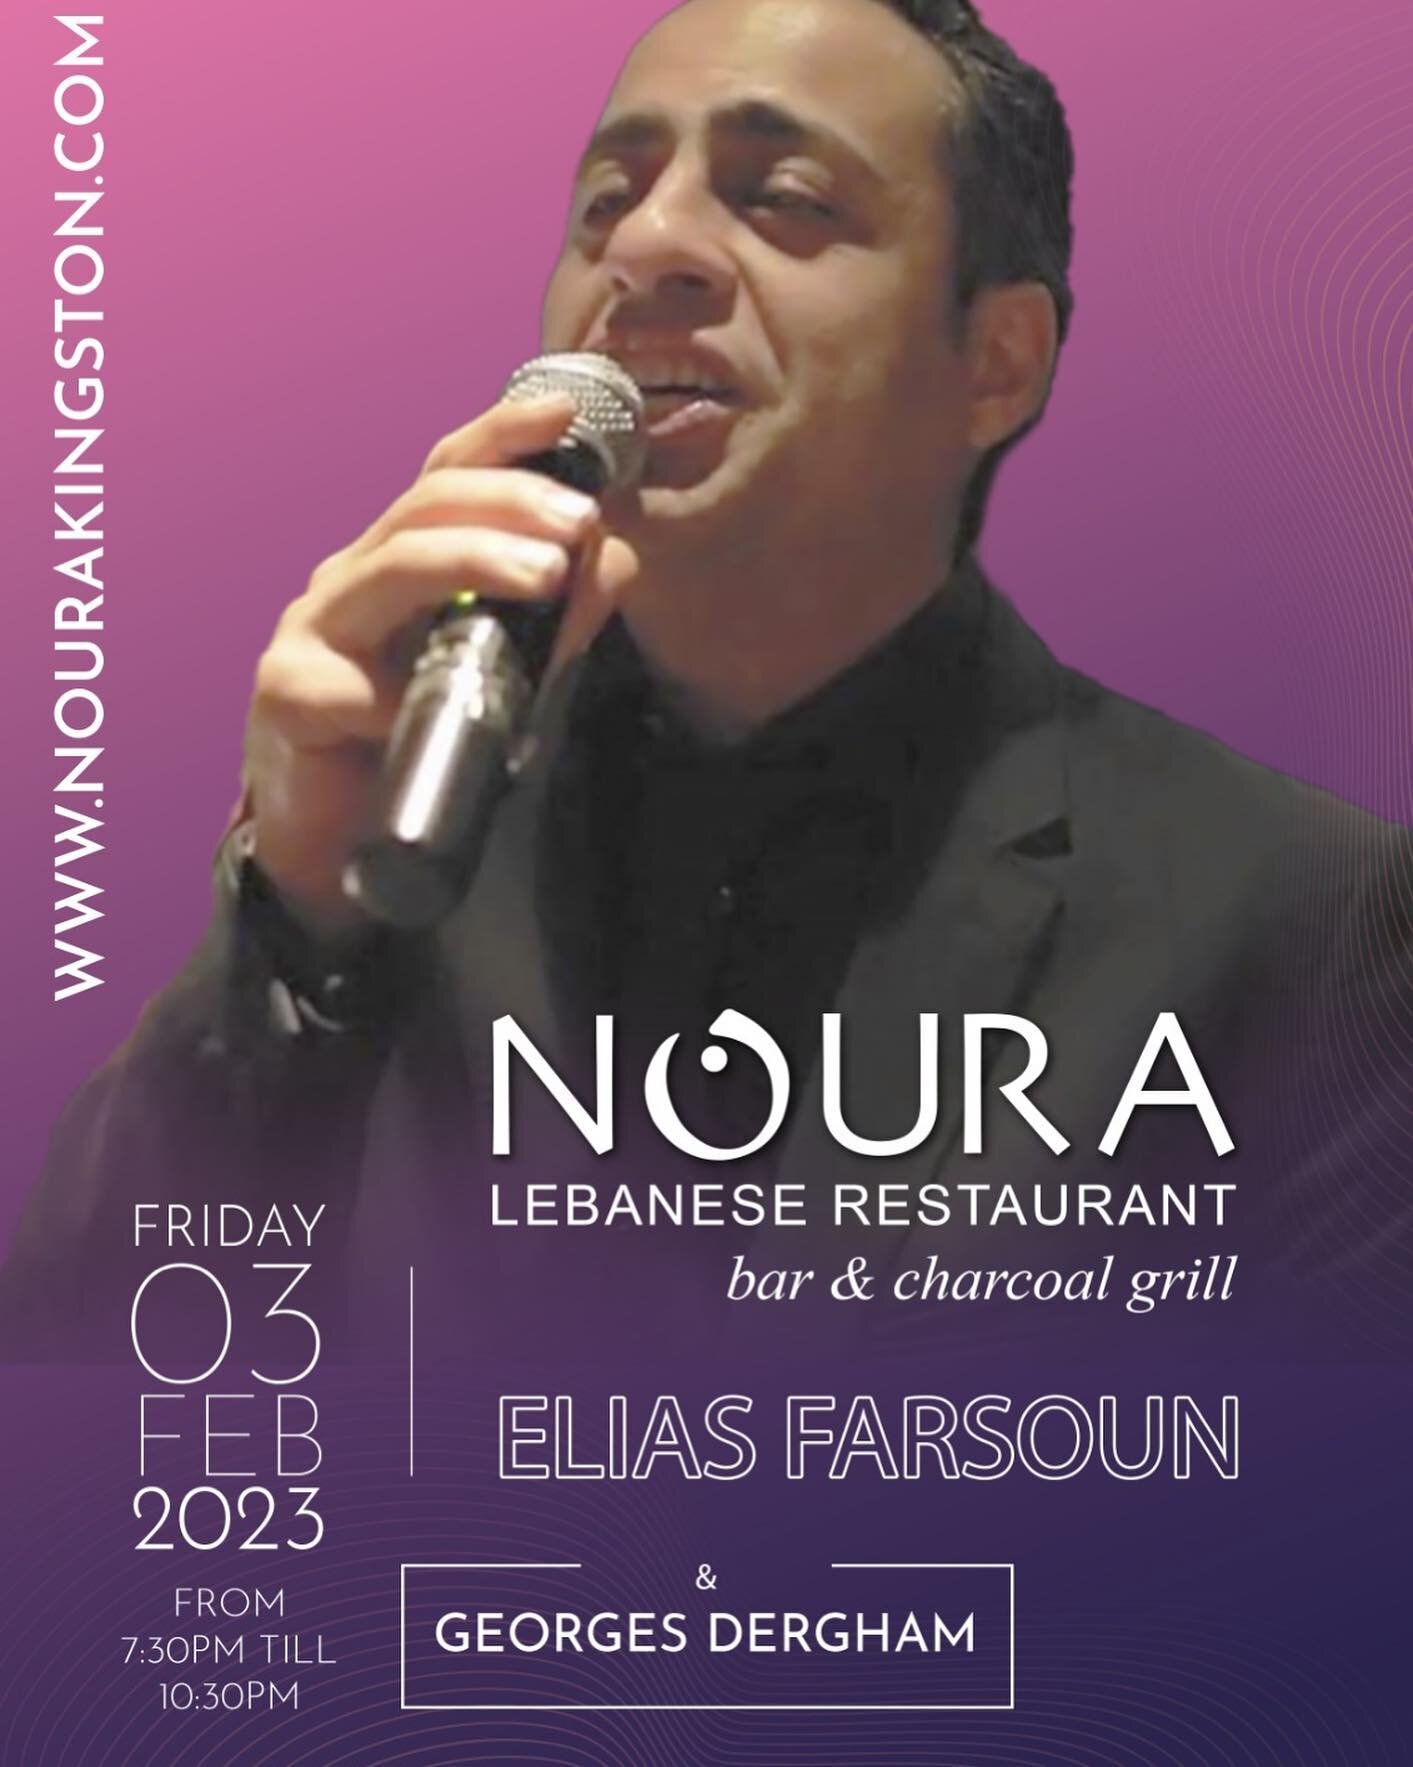 Join us on the 3rd of February for a memorable evening of entertainment at Noura Kingston with @eliasfarsoon and @dergham cucumber&hellip;

*
*
*

#food #foodporn #wedding #instafood #foodie #London #birthday #delicious #vegan #dinner #healthyfood #l